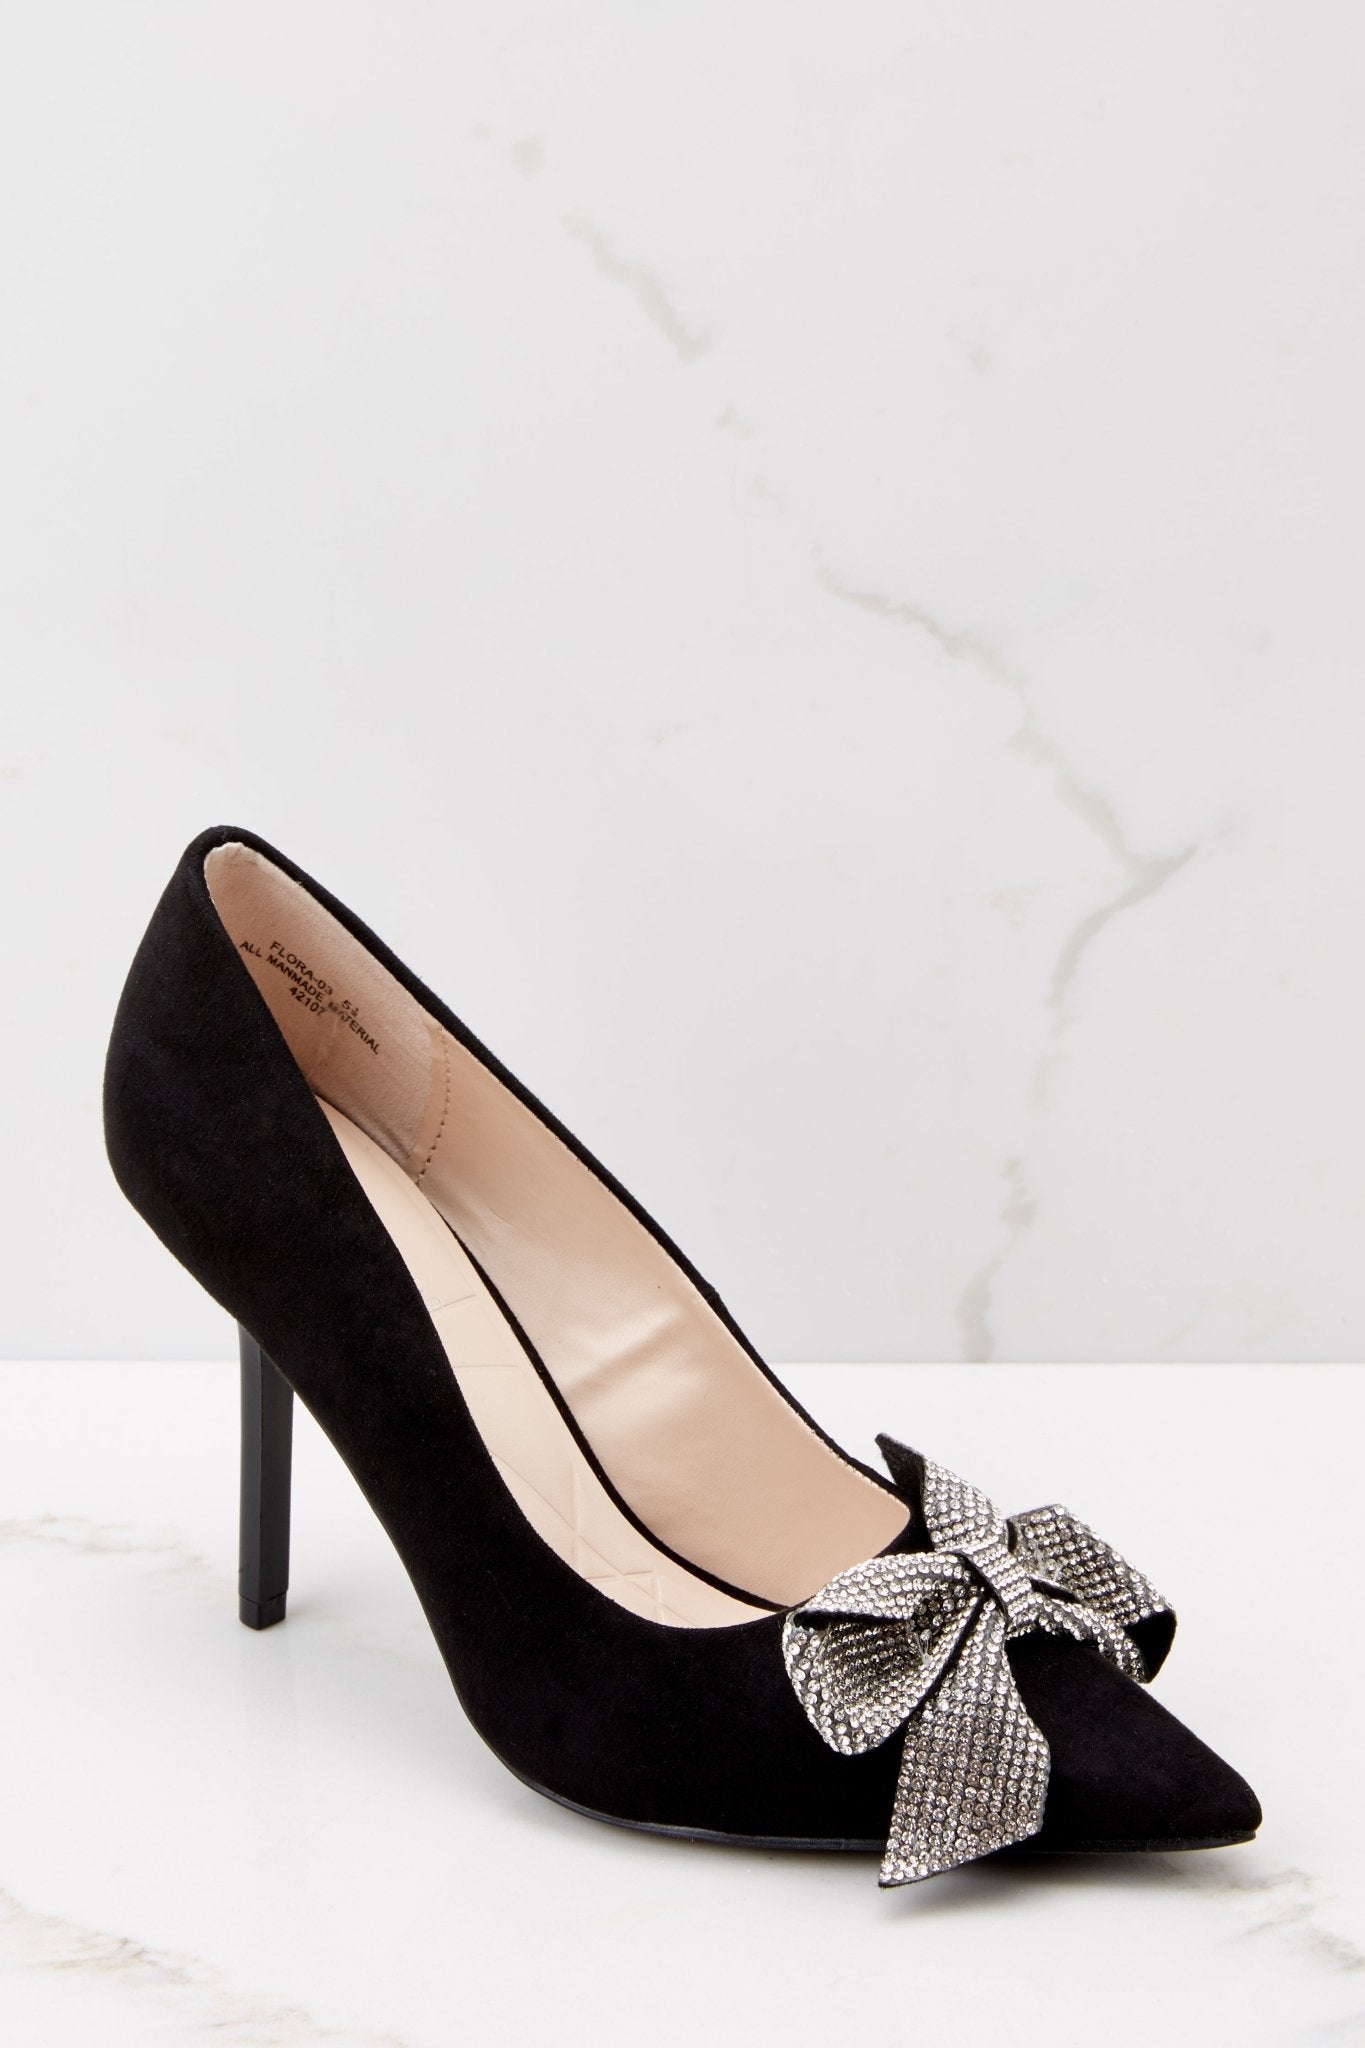 Marvel at These Black Heels